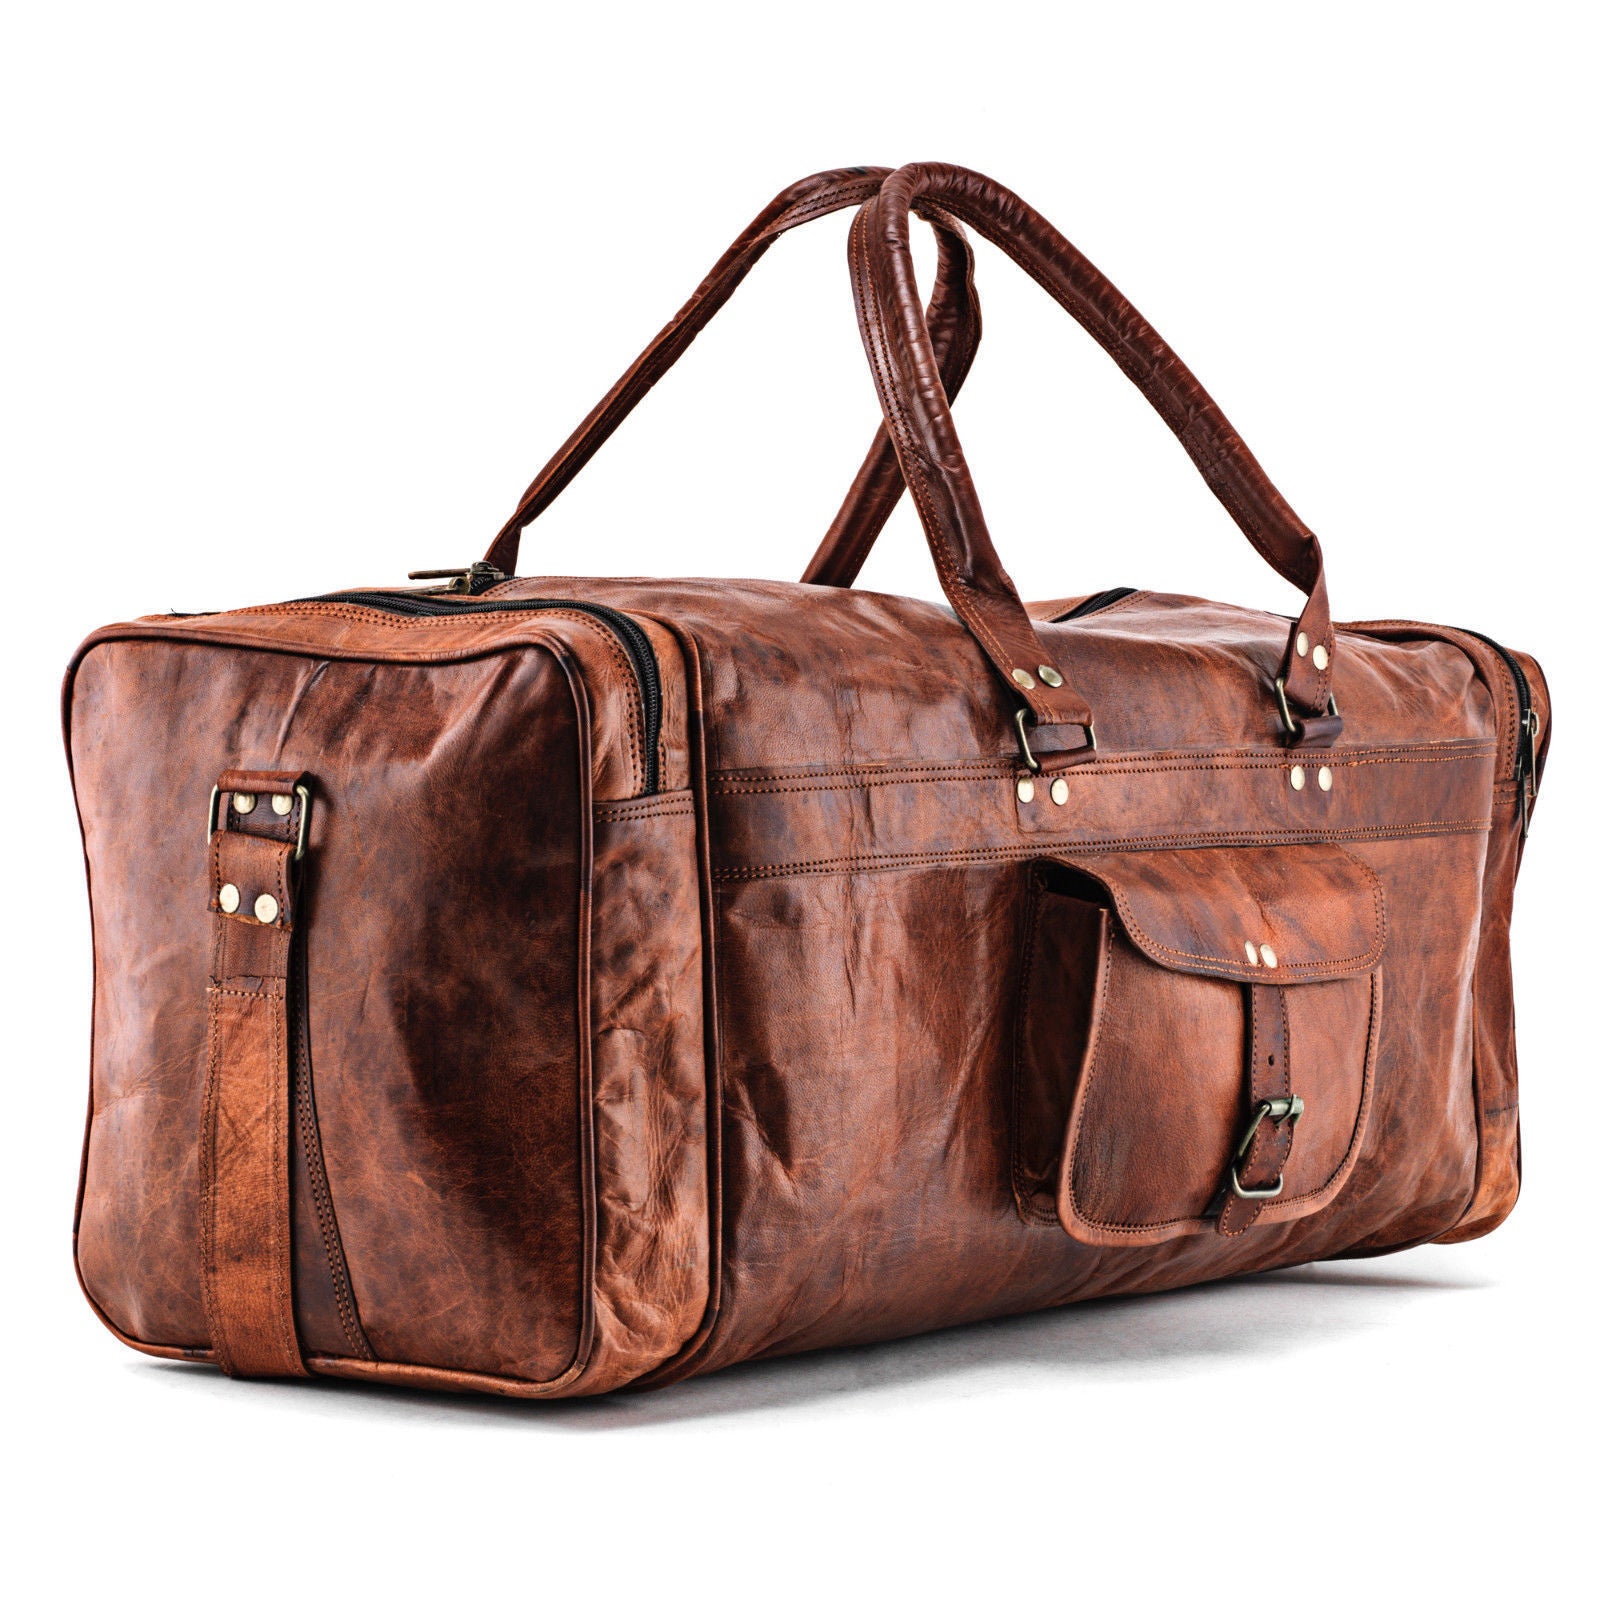 Full Grain Large Leather Square Duffle Bag with Top Handle